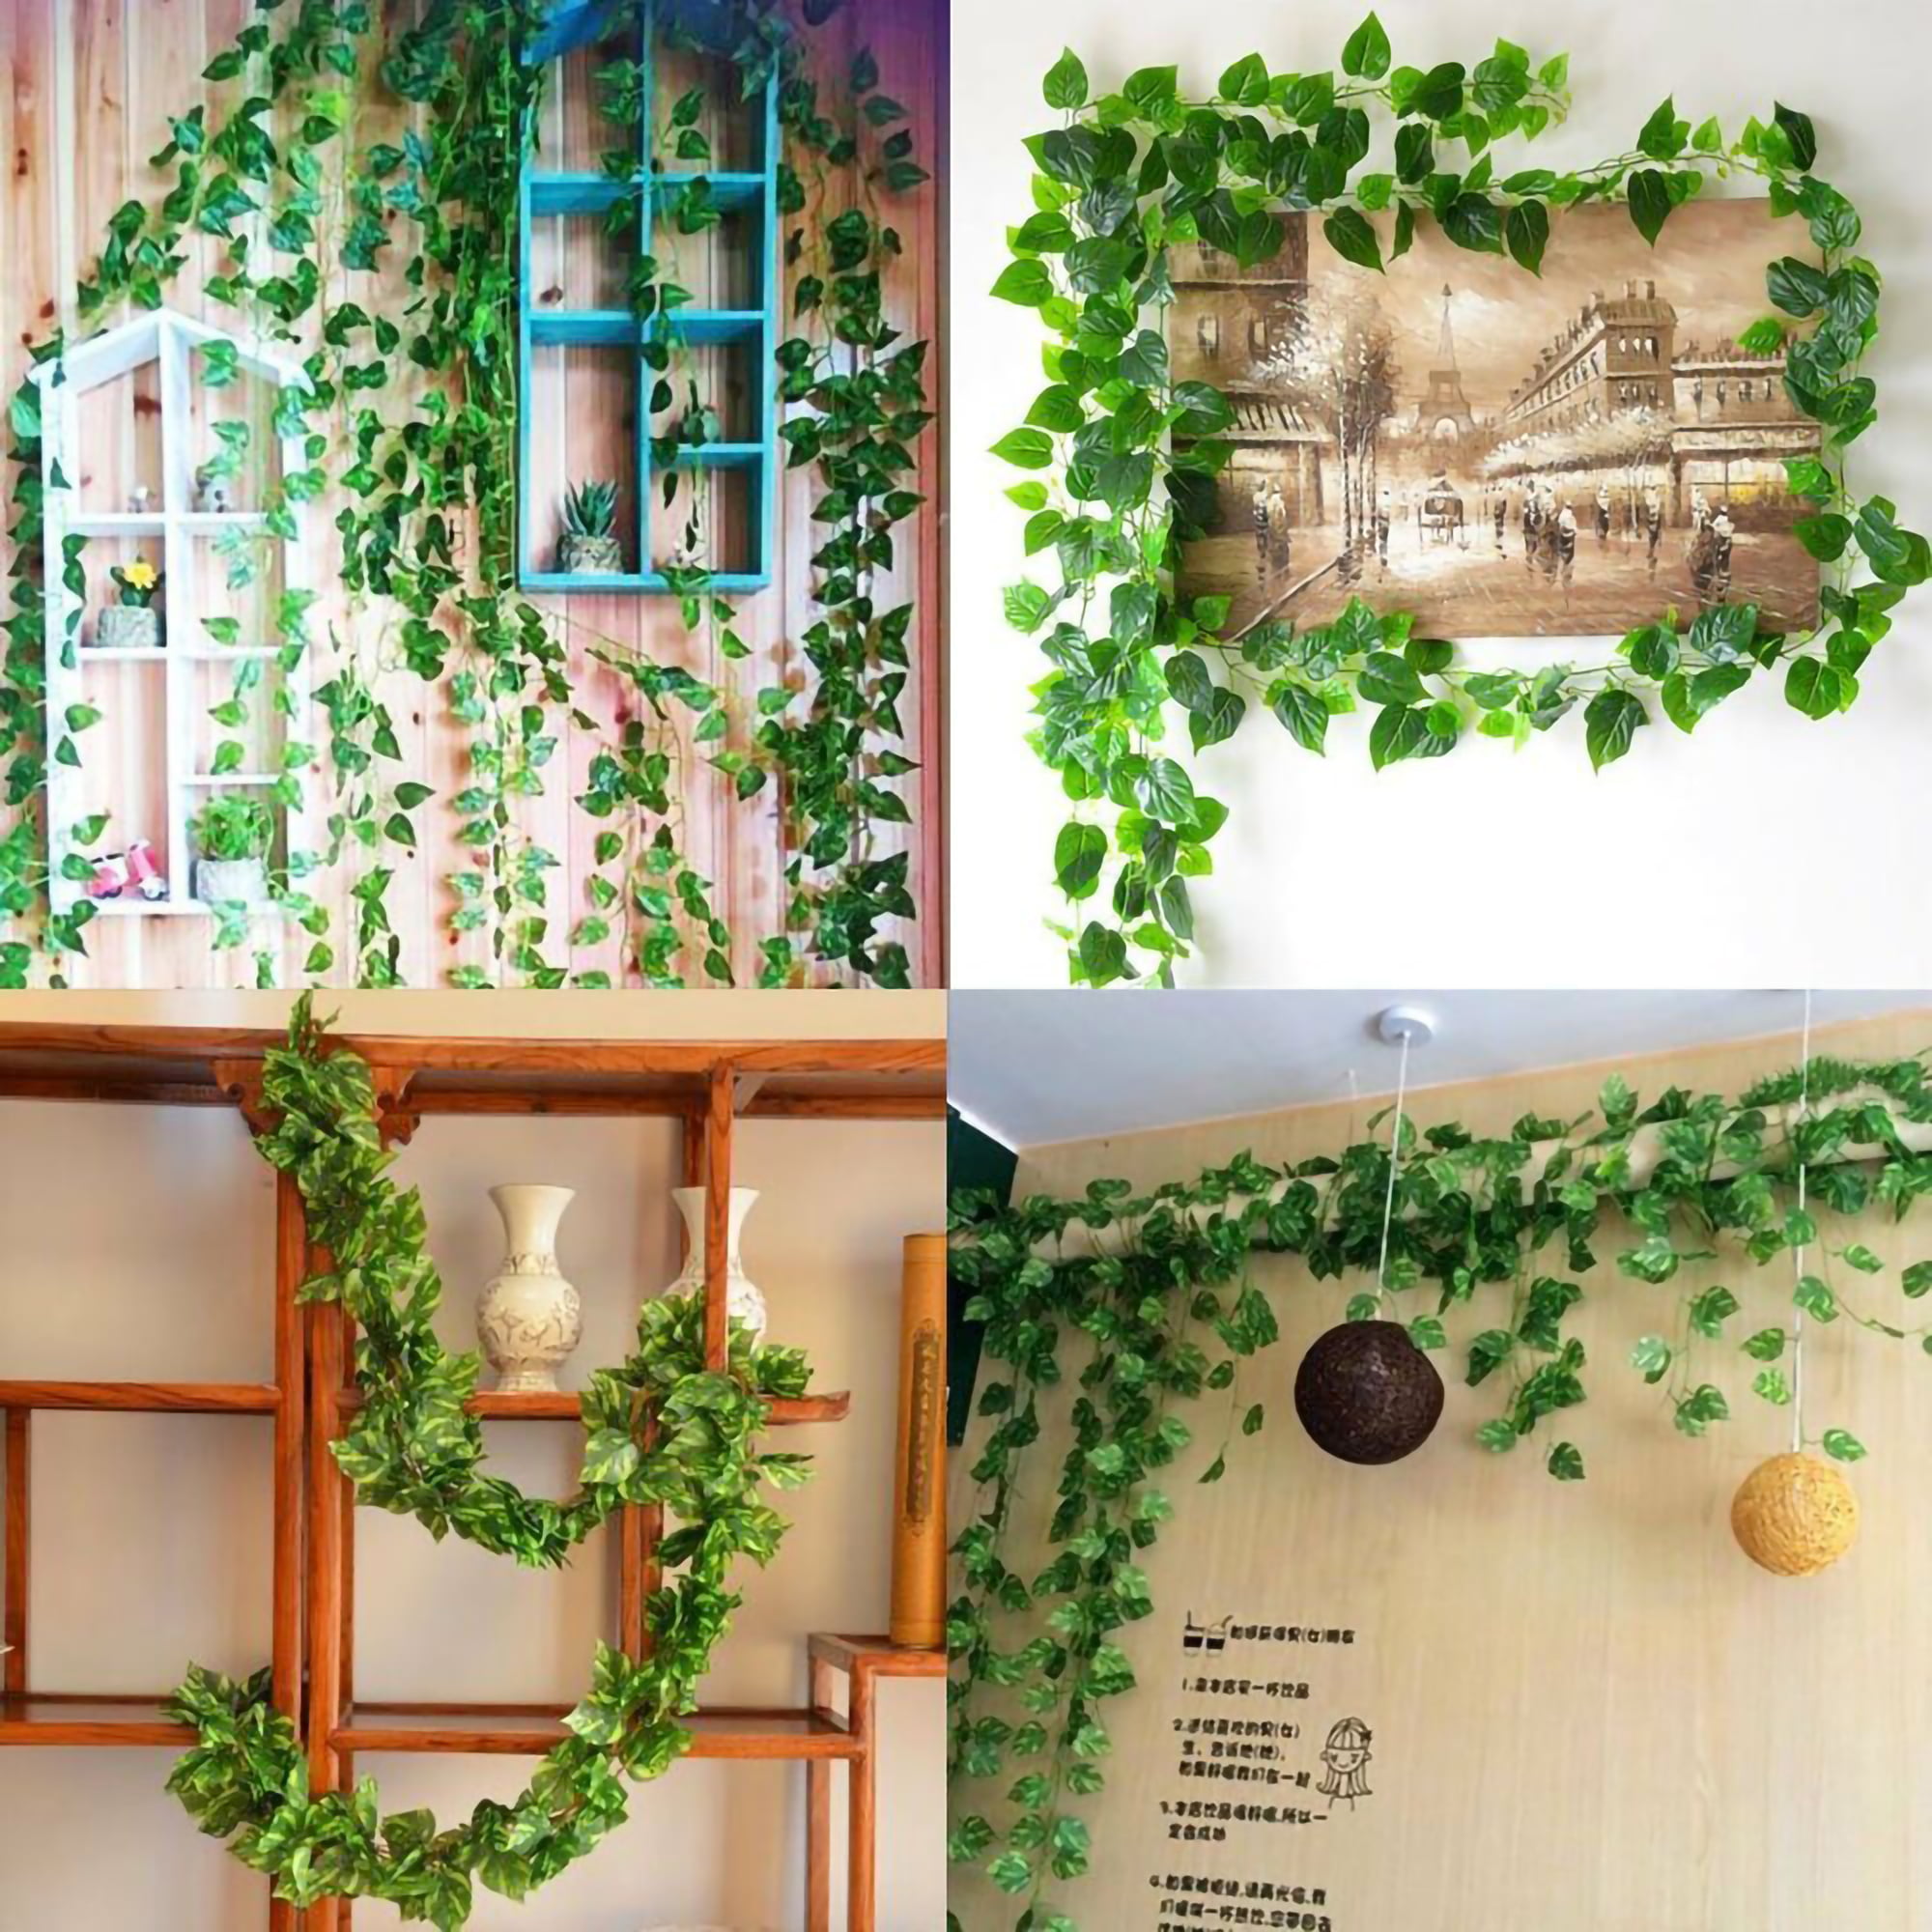 RECUTMS 86 FT Artificial Ivy Fake Greenery Leaf Garland Plants Vine Foliage  Flowers Hanging for Wedding Party Garden Home Kitchen Office Wall